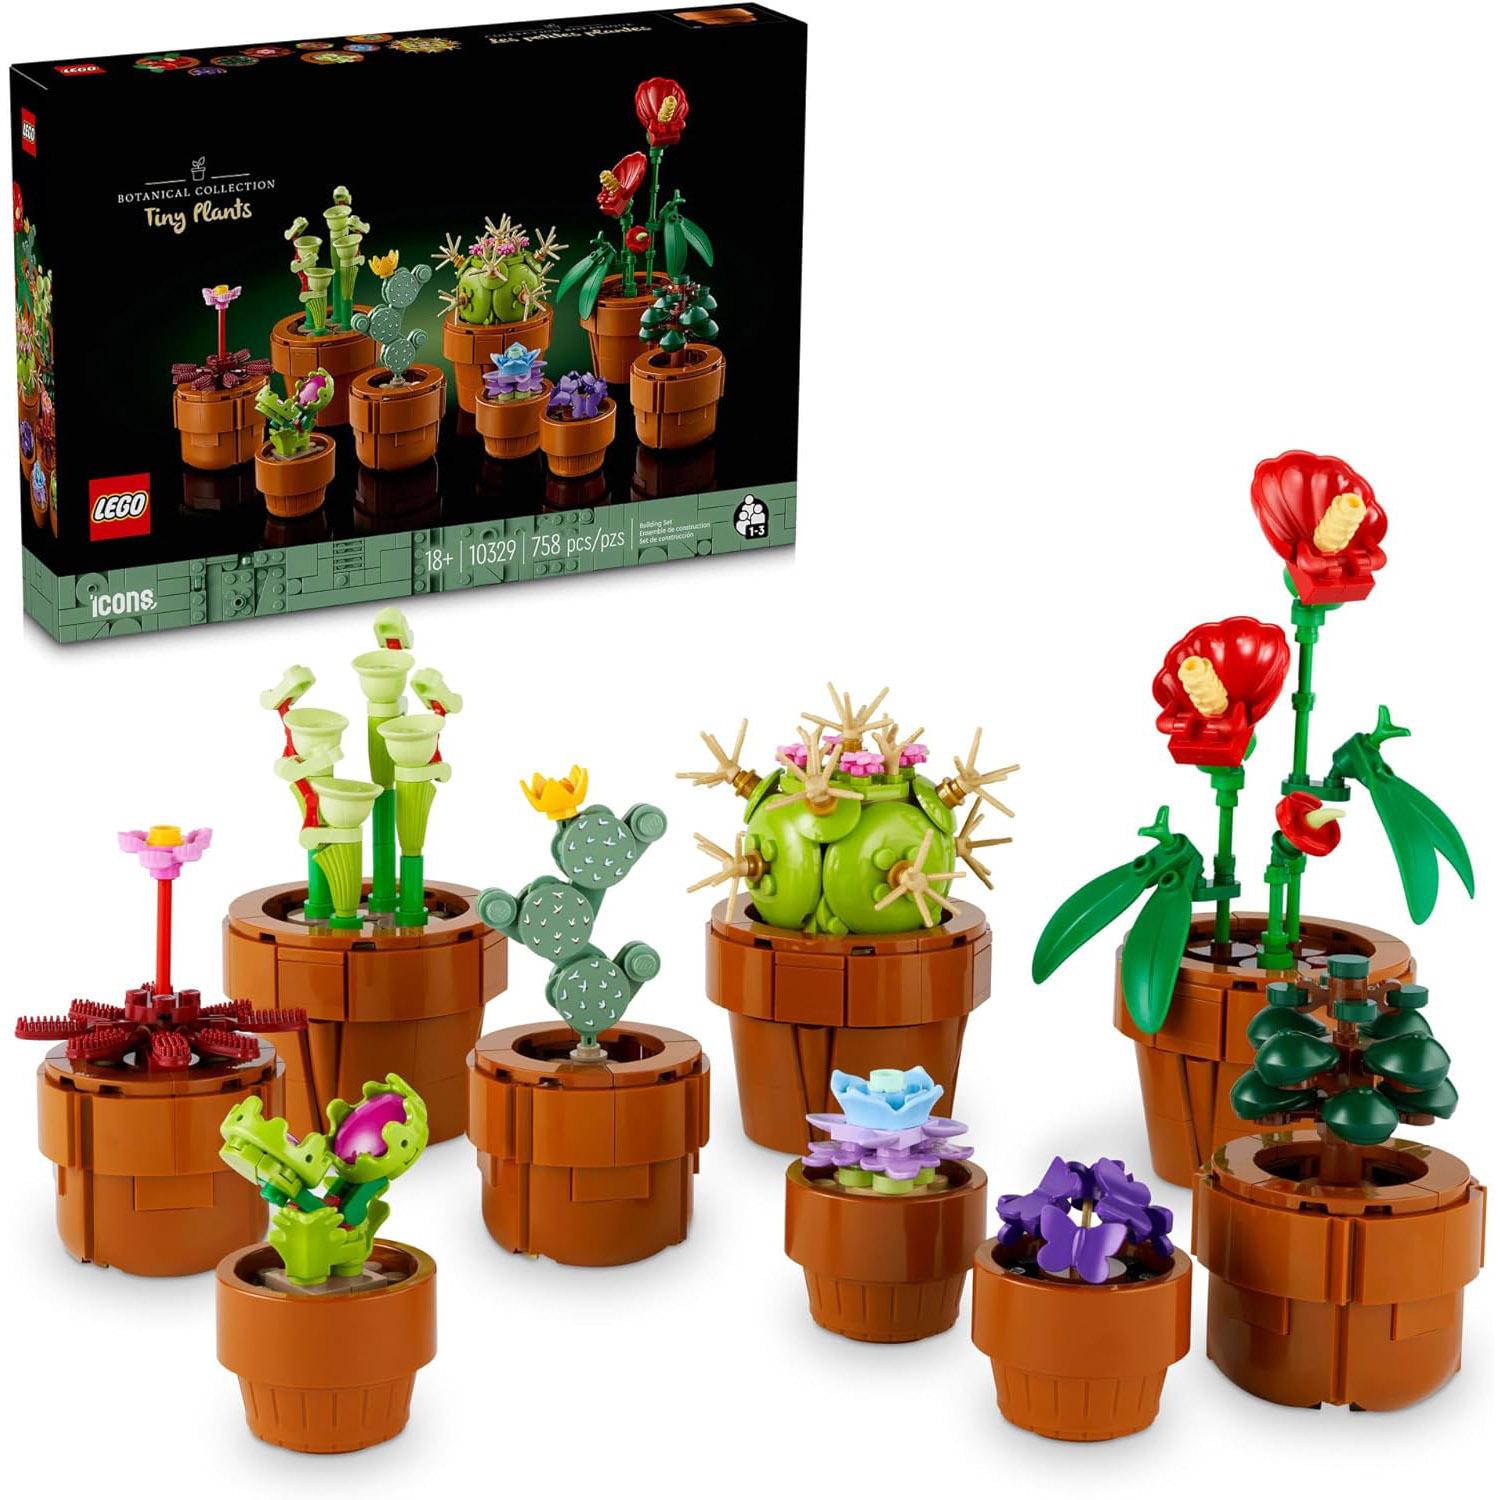 LEGO Icons Tiny Plants Building Set 10329 for $39.99 Shipped